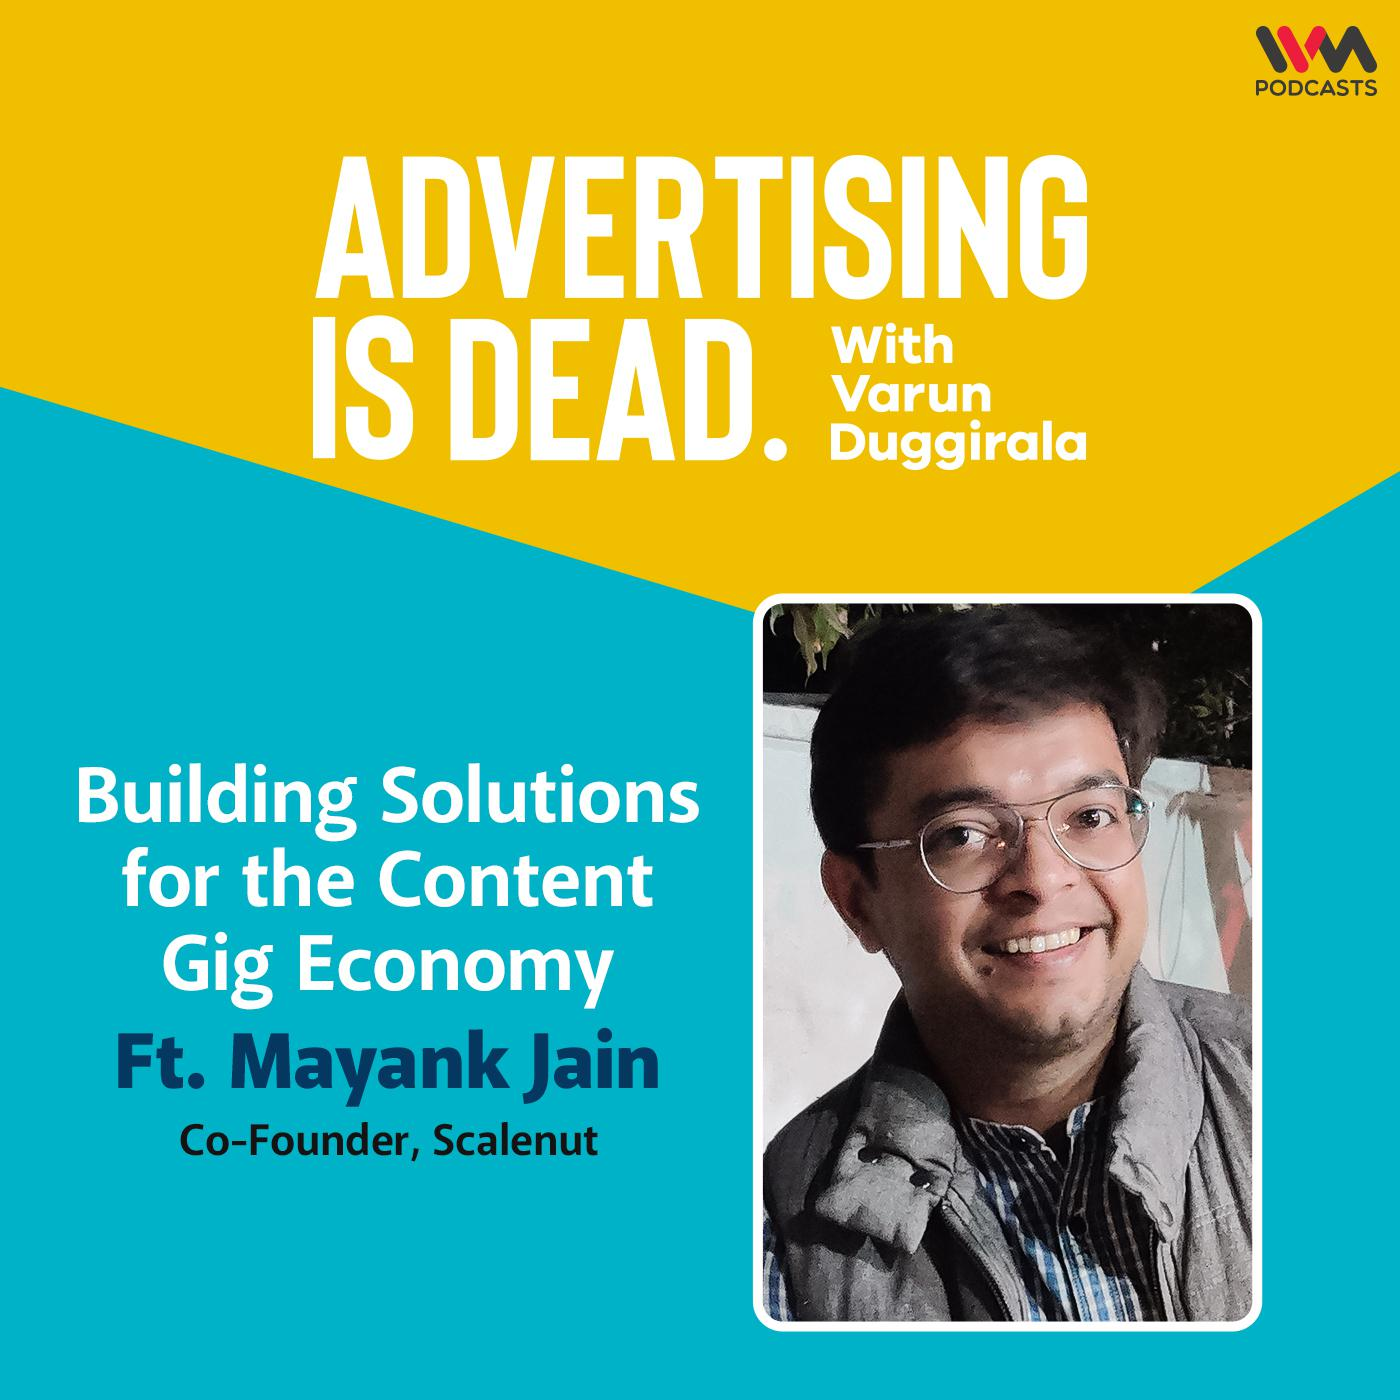 Mayank Jain on Building Solutions for the Content Gig Economy